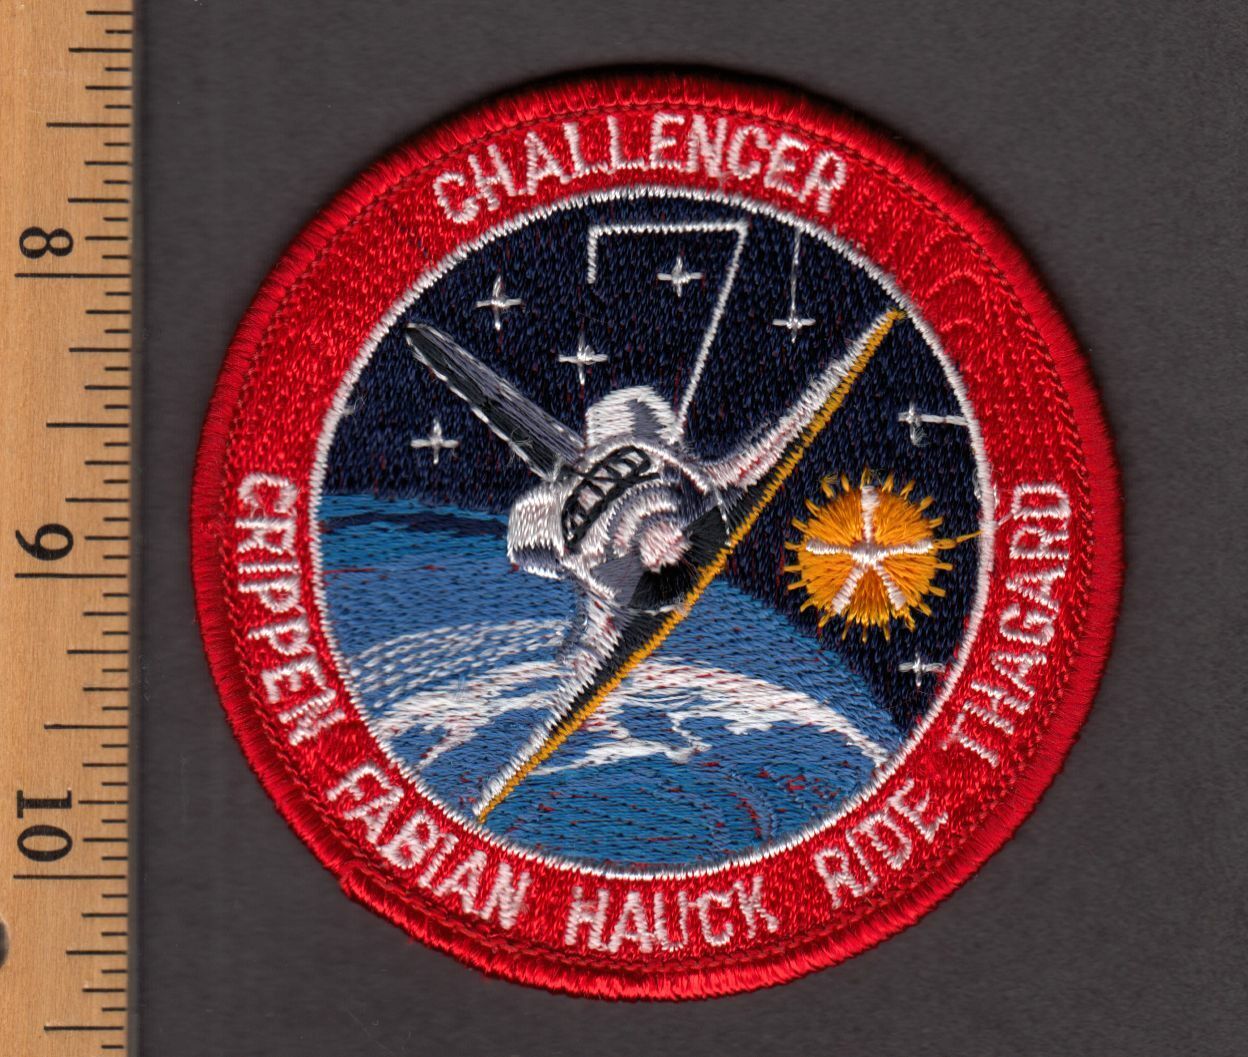 1983 Challenger STS-7 Space Shuttle embroidered 3\